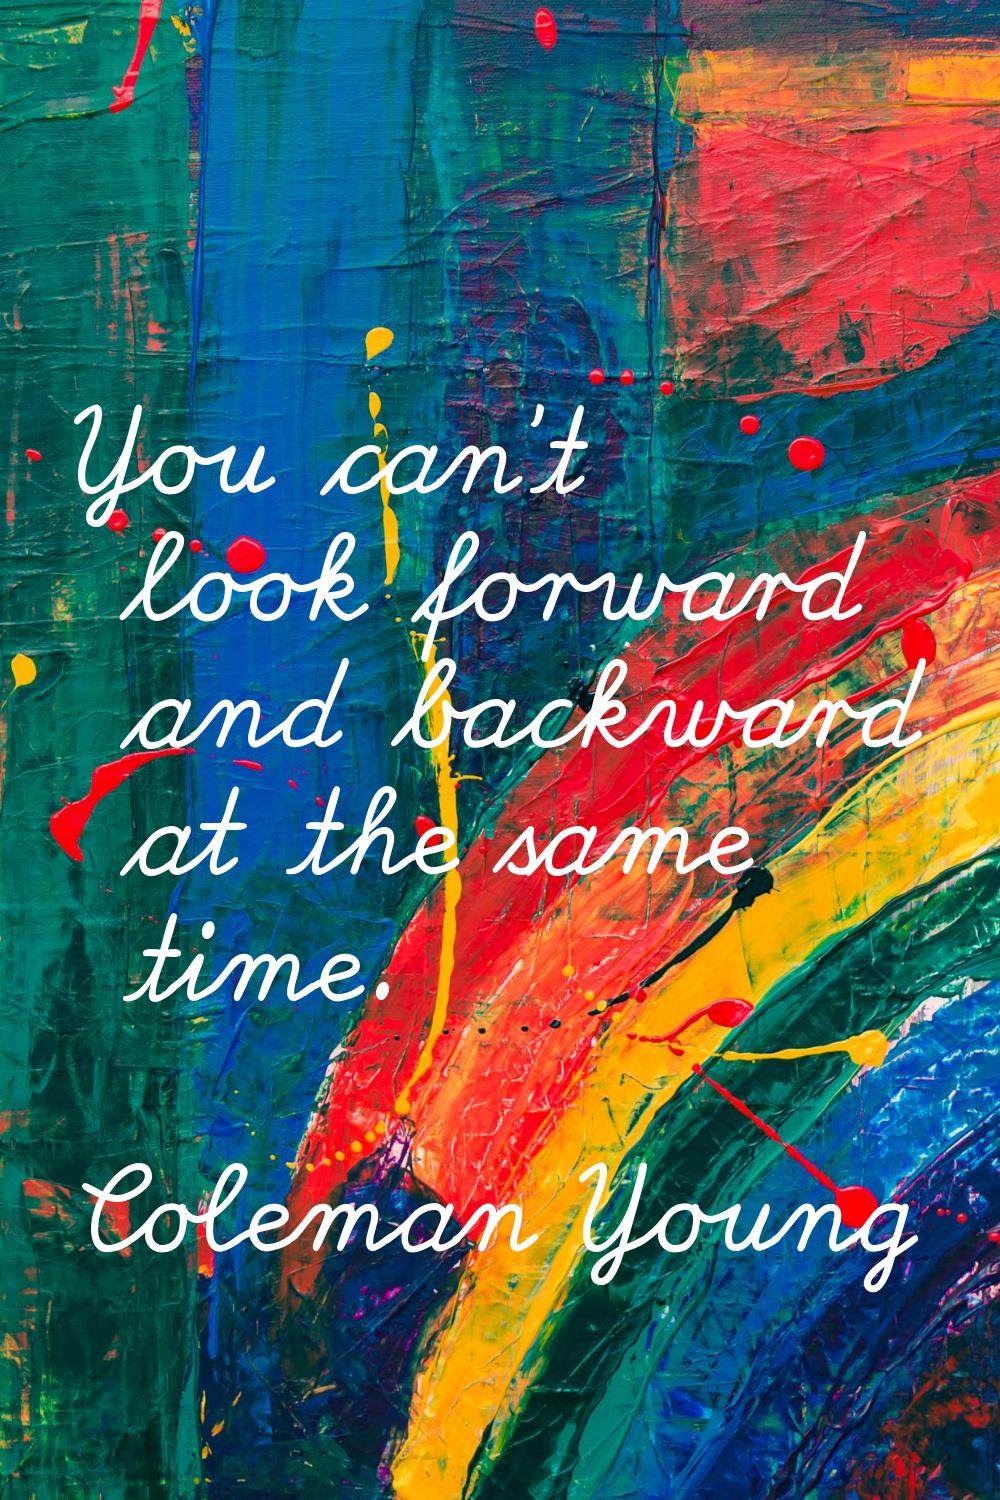 You can't look forward and backward at the same time.